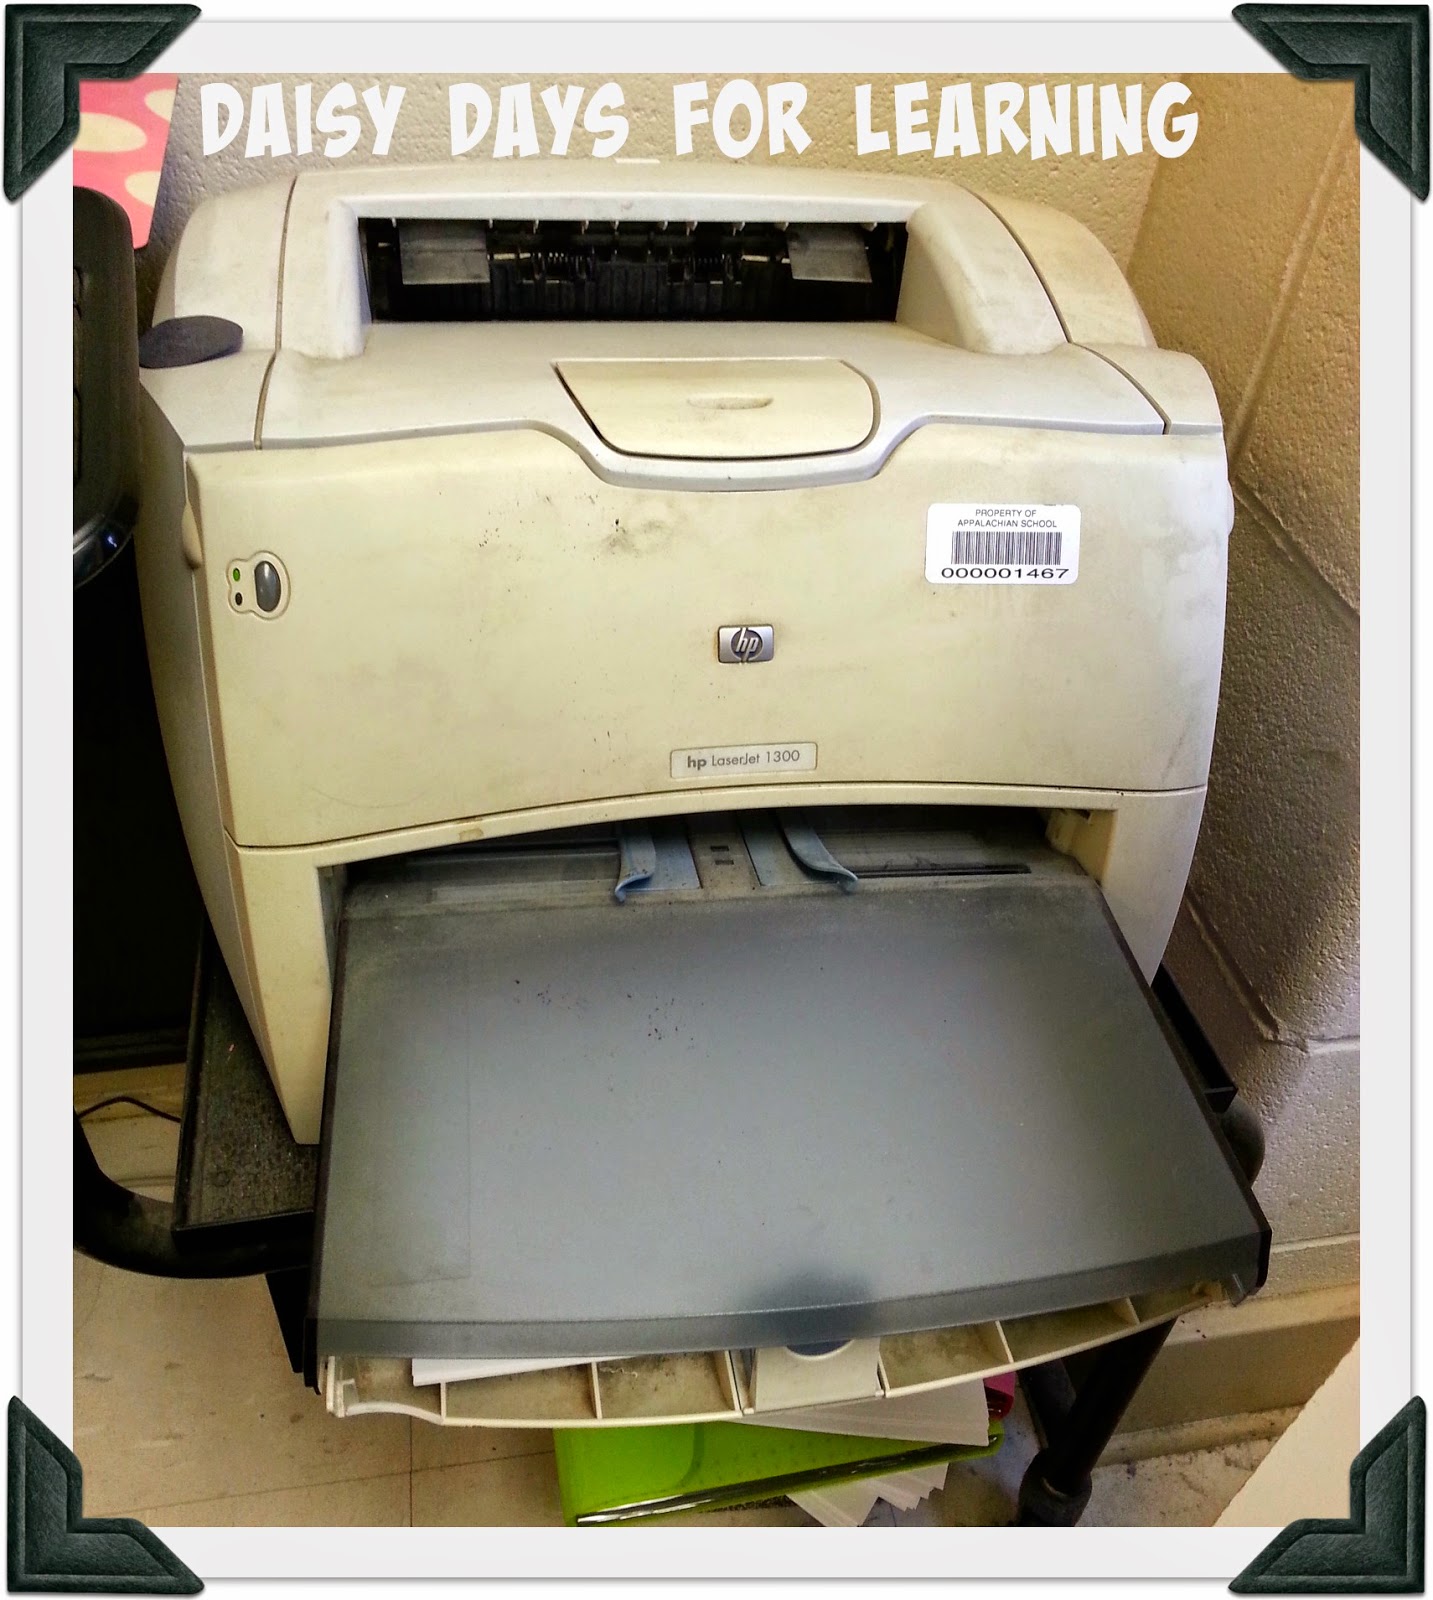 Daisy Days for Learning: Out with the OLD and in with the NEW......PRINTER!